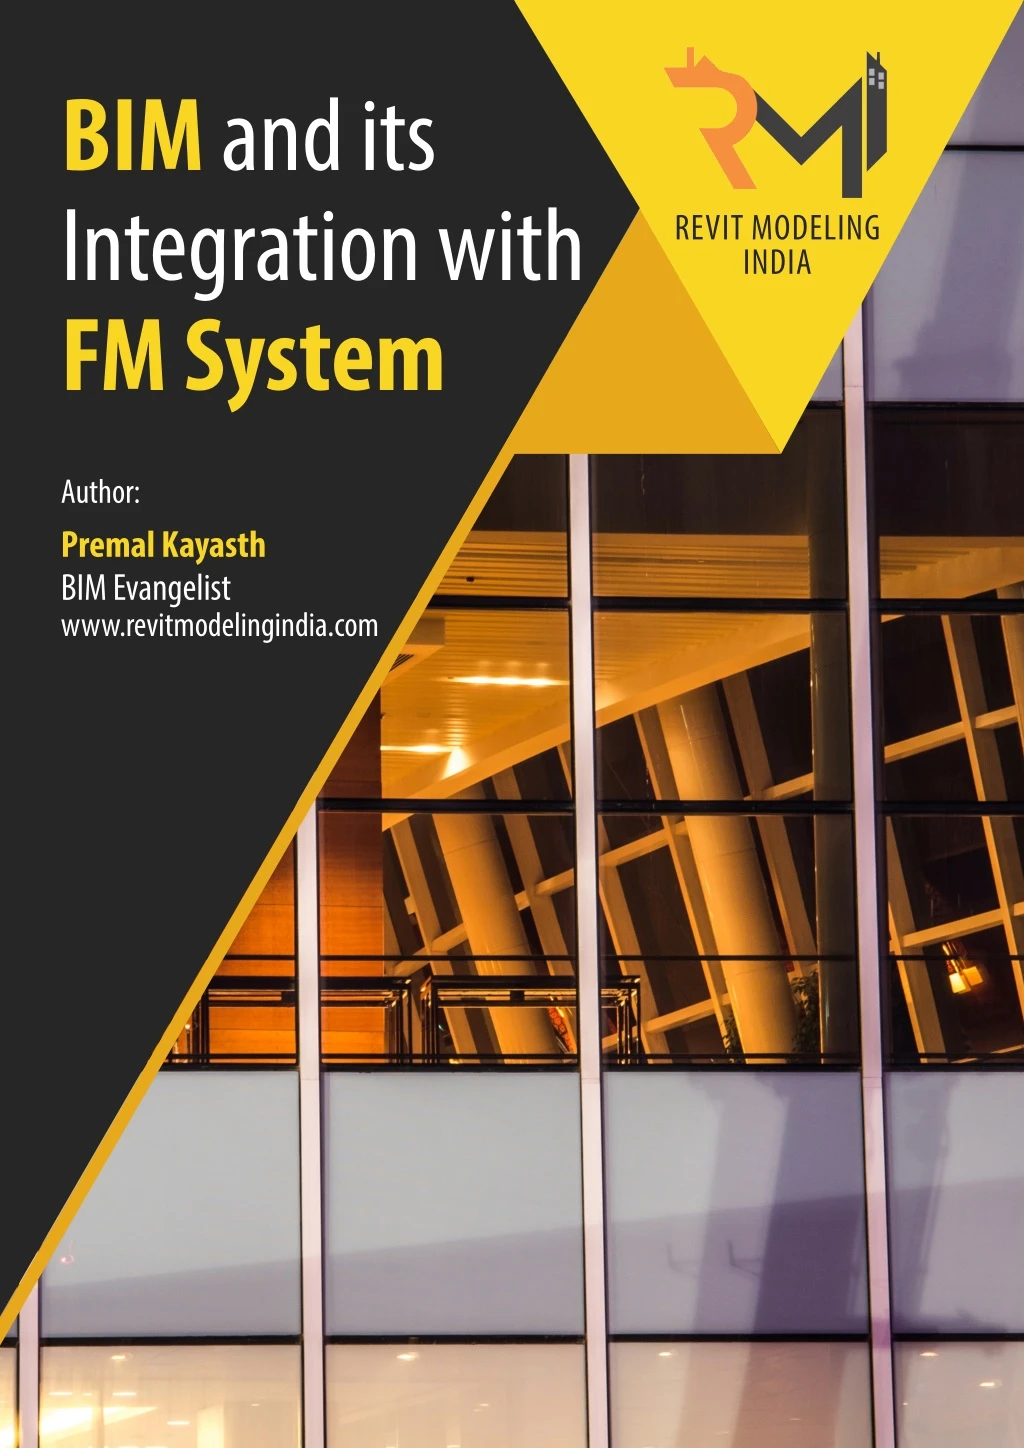 bim and its integration with fm system